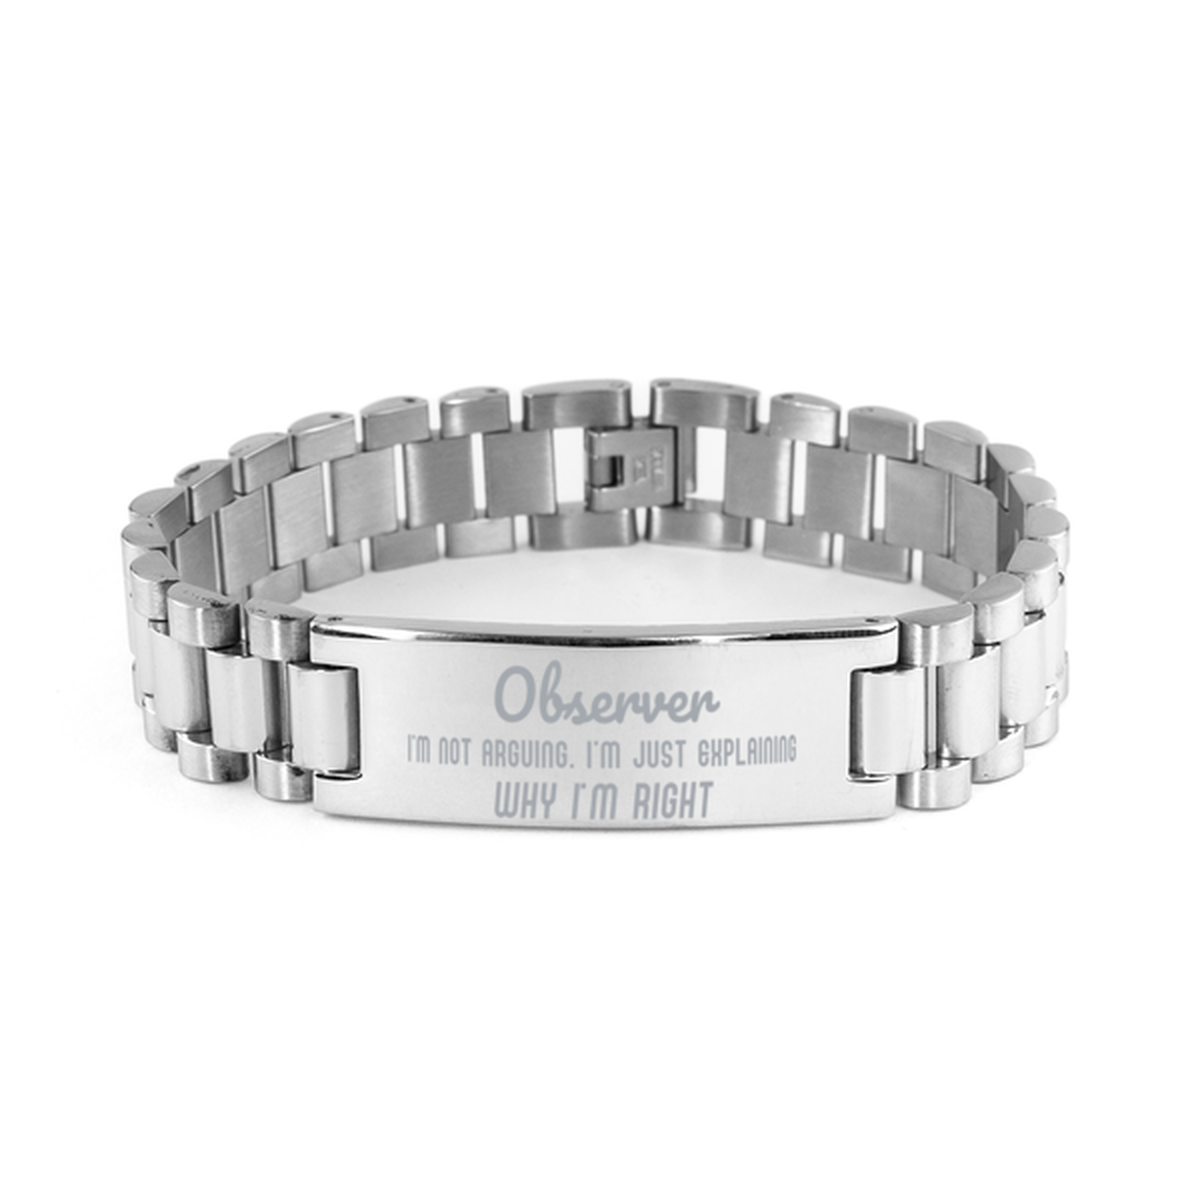 Observer I'm not Arguing. I'm Just Explaining Why I'm RIGHT Ladder Stainless Steel Bracelet, Graduation Birthday Christmas Observer Gifts For Observer Funny Saying Quote Present for Men Women Coworker